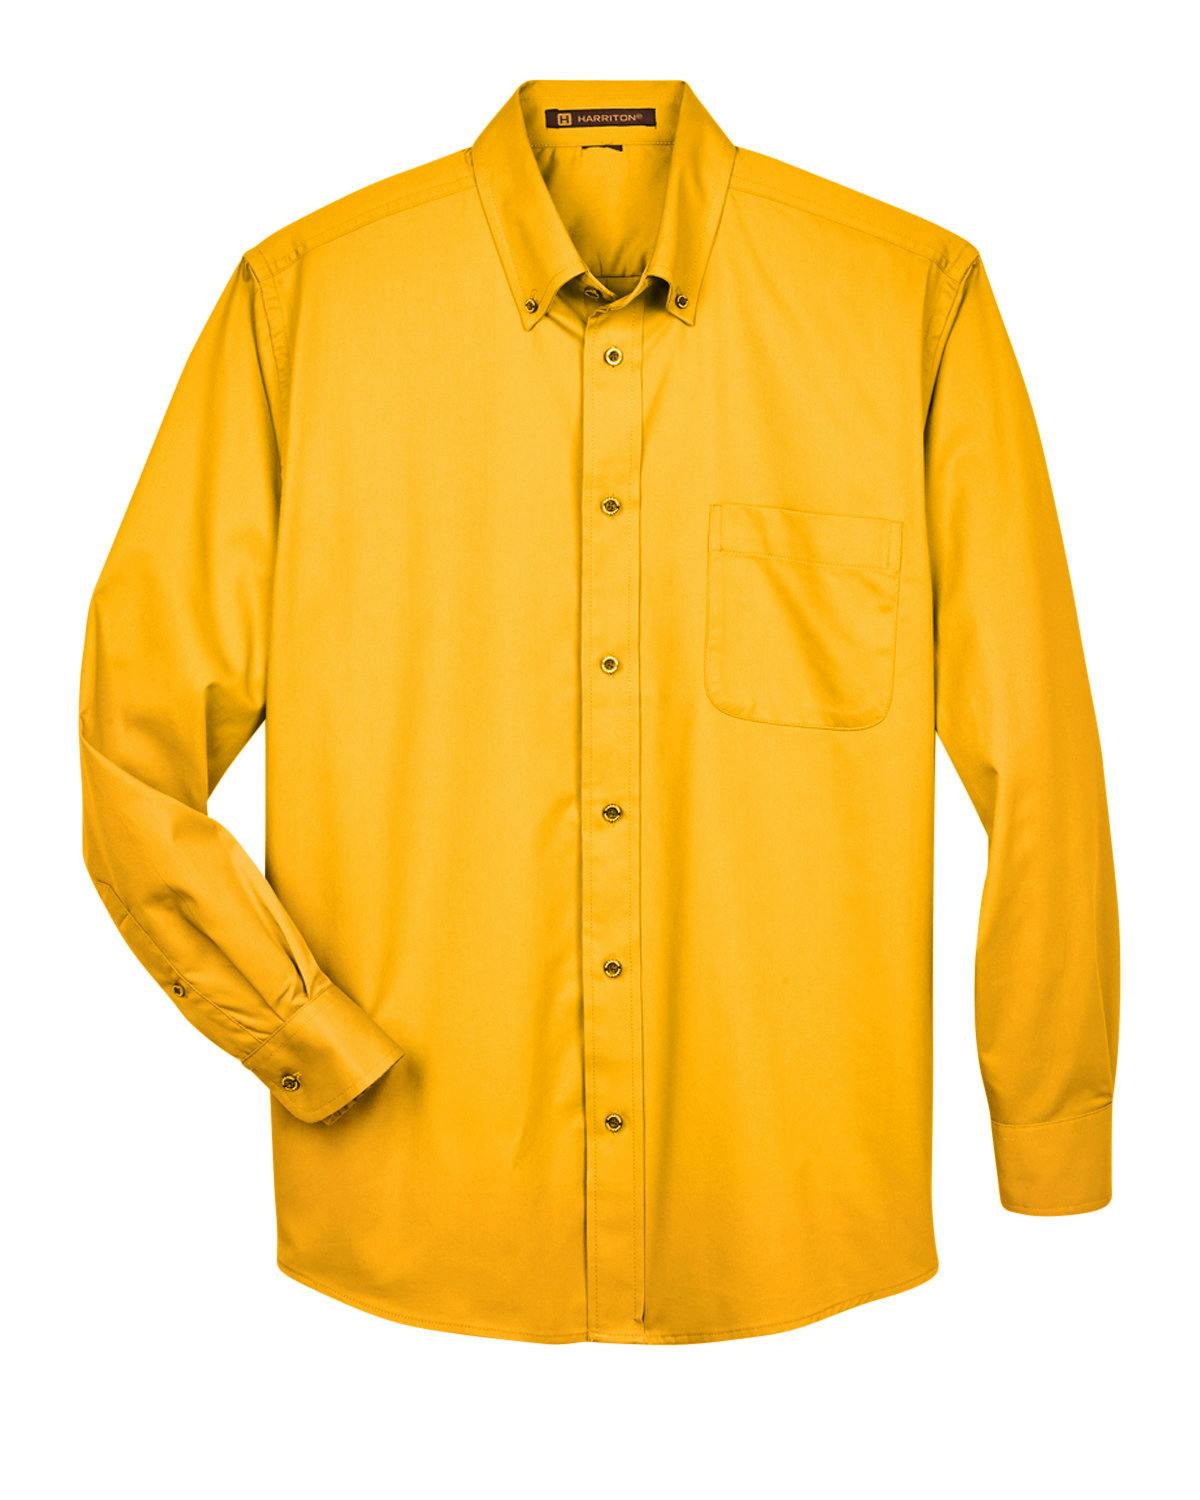 Image for Men's Easy Blend™ Long-Sleeve Twill Shirt with Stain-Release